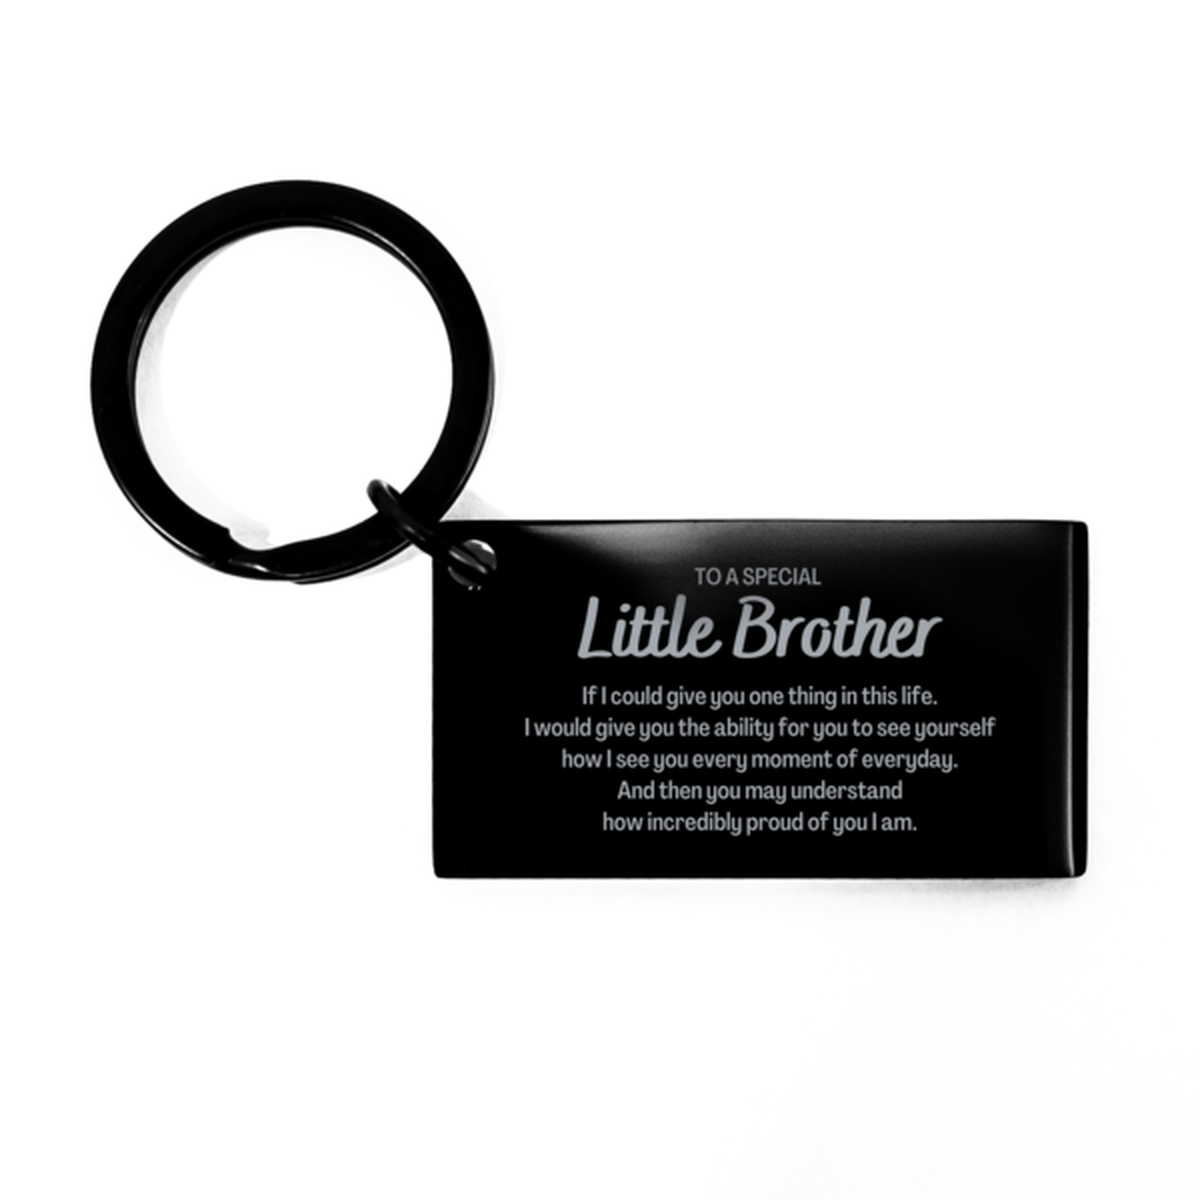 To My Little Brother Keychain, Gifts For Little Brother Engraved, Inspirational Gifts for Christmas Birthday, Epic Gifts for Little Brother To A Special Little Brother how incredibly proud of you I am